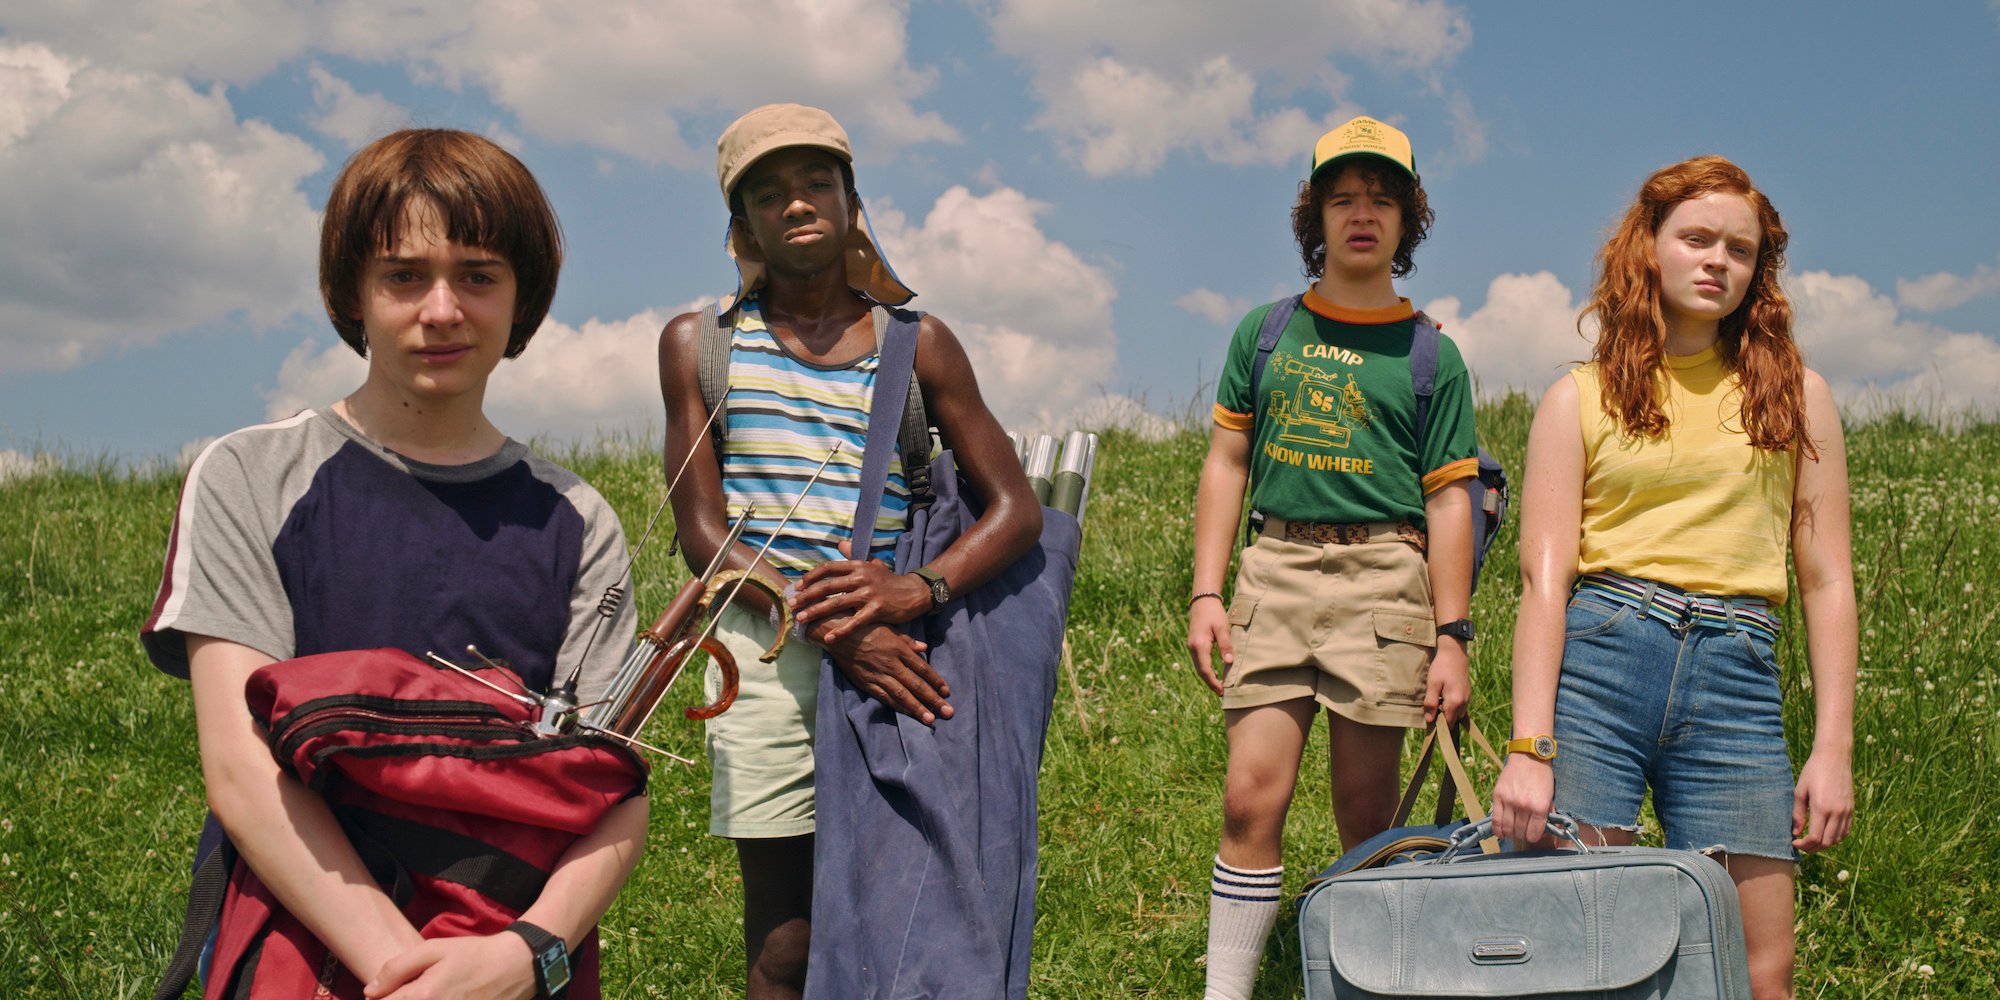 'Stranger Things' Season 3 production still of Will Byers, Lucas Sinclair, Dustin Henderson, and Max Mayfield standing in a field